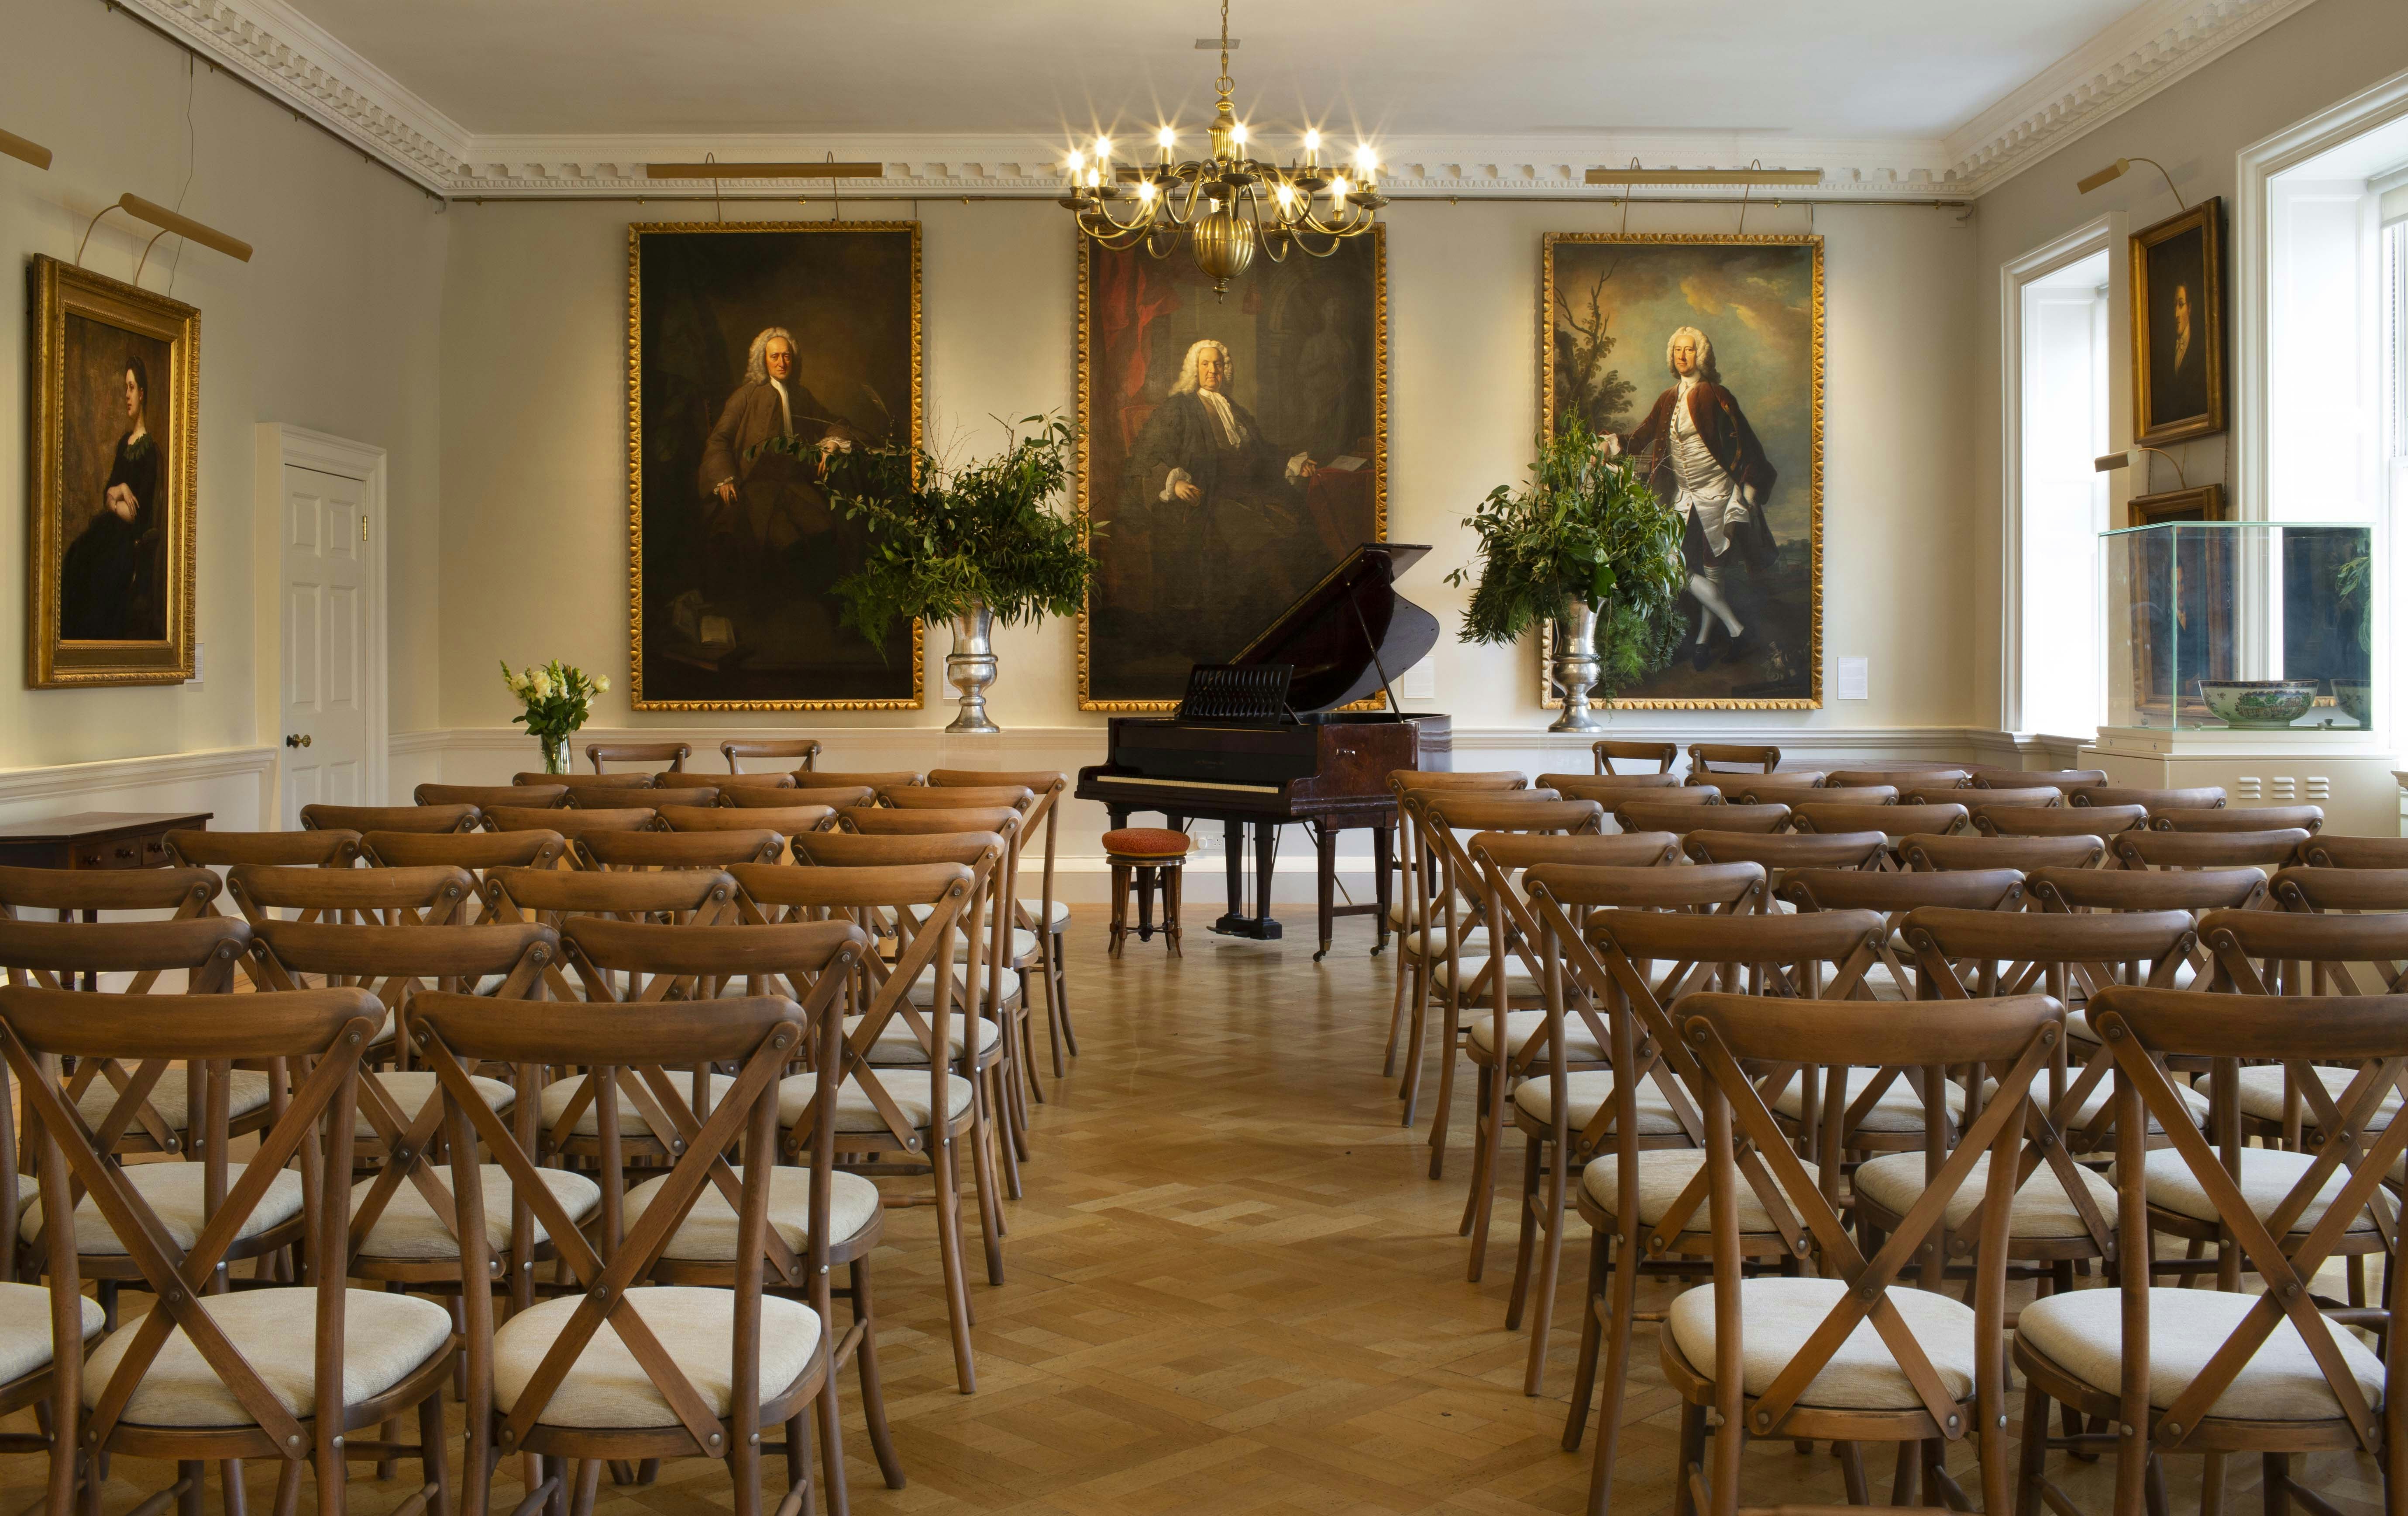 Bar Mitzvah Venues in London - The Foundling Museum